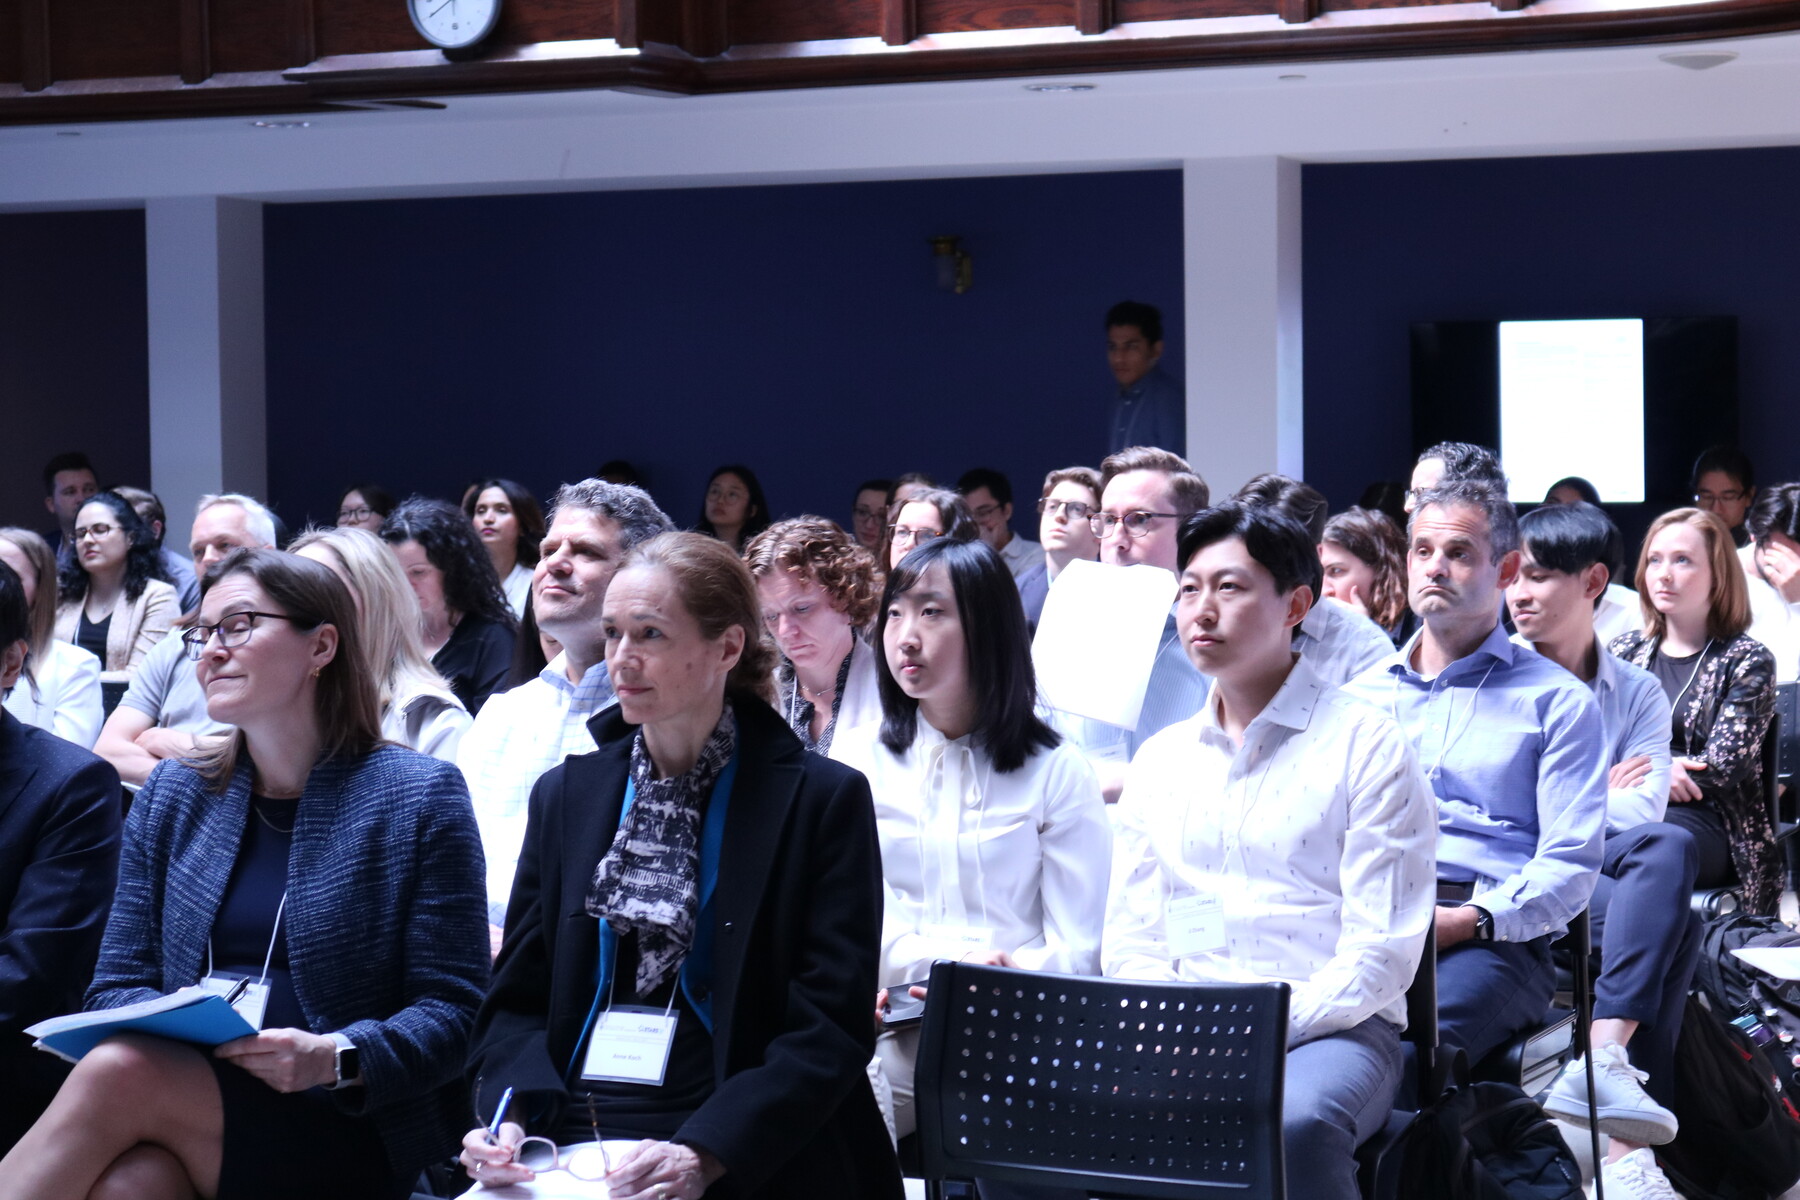 Audience of researchers, faculty, and trainees from the UofT Department of Radiation Oncology listening to the research oral presentations being presented at our UTDRO & STARS21 Research Day 2023 event.